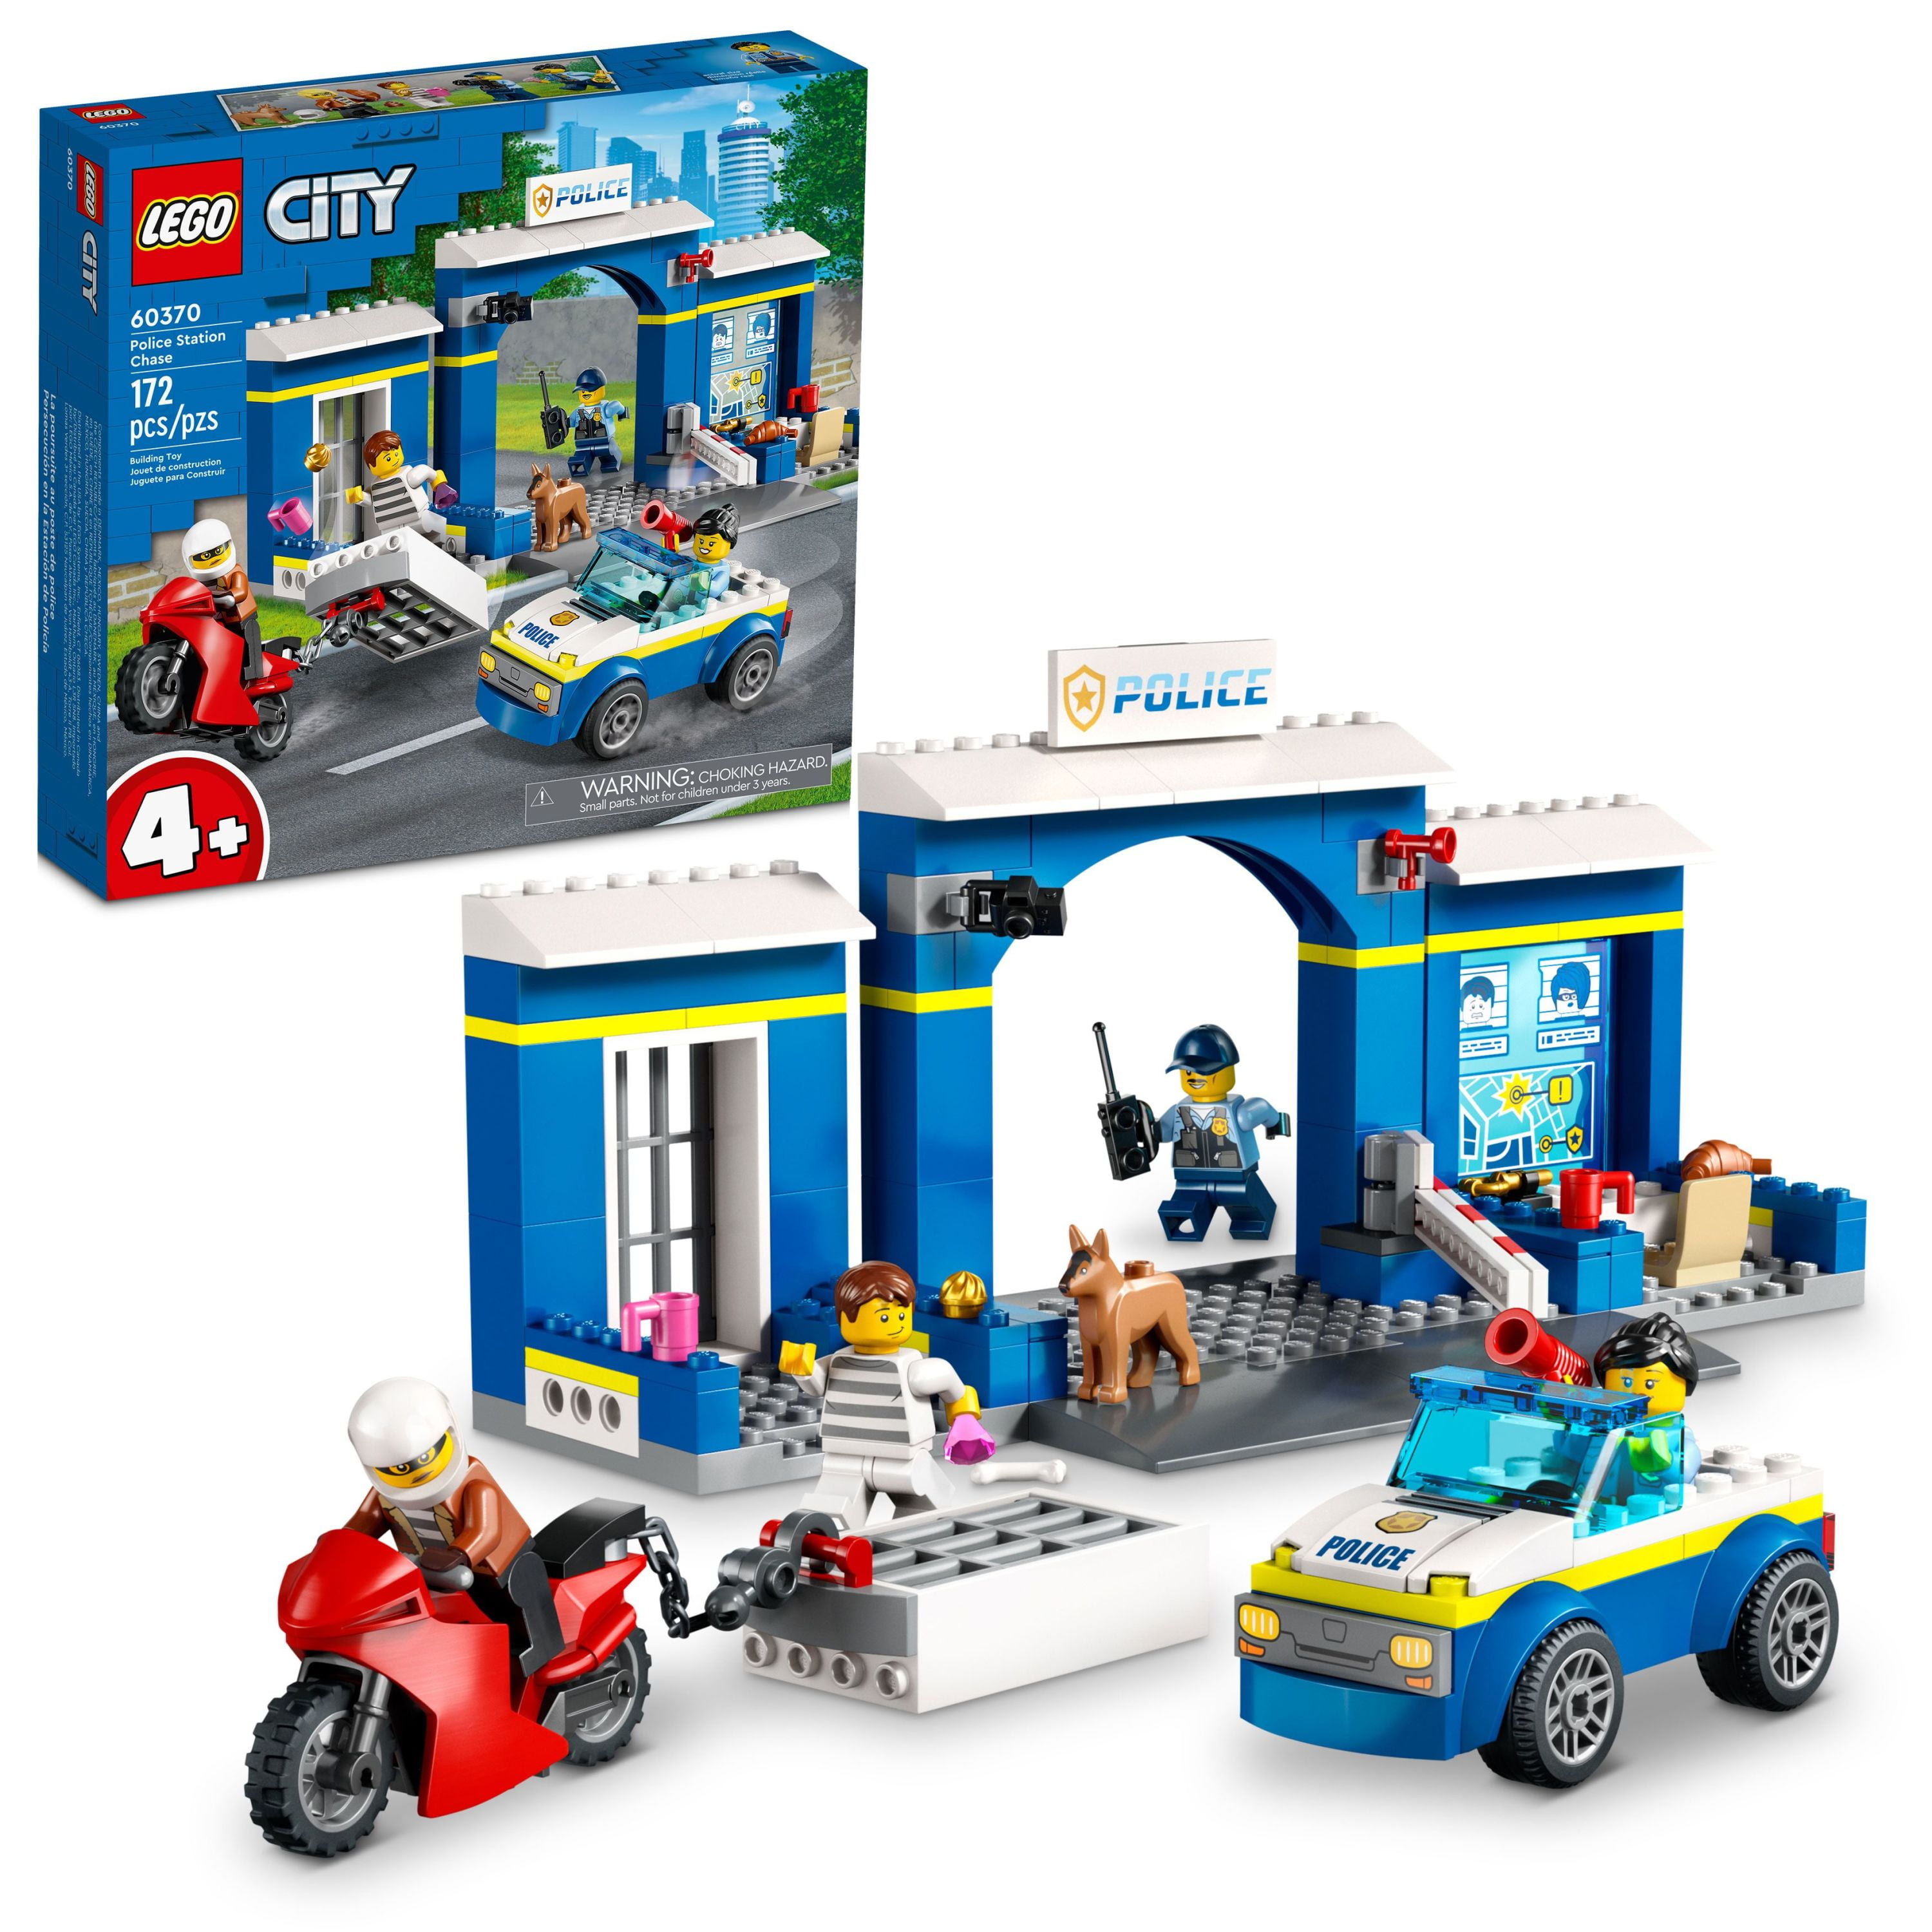 LEGO City Station Chase Set with Police Car Toy 60370 -